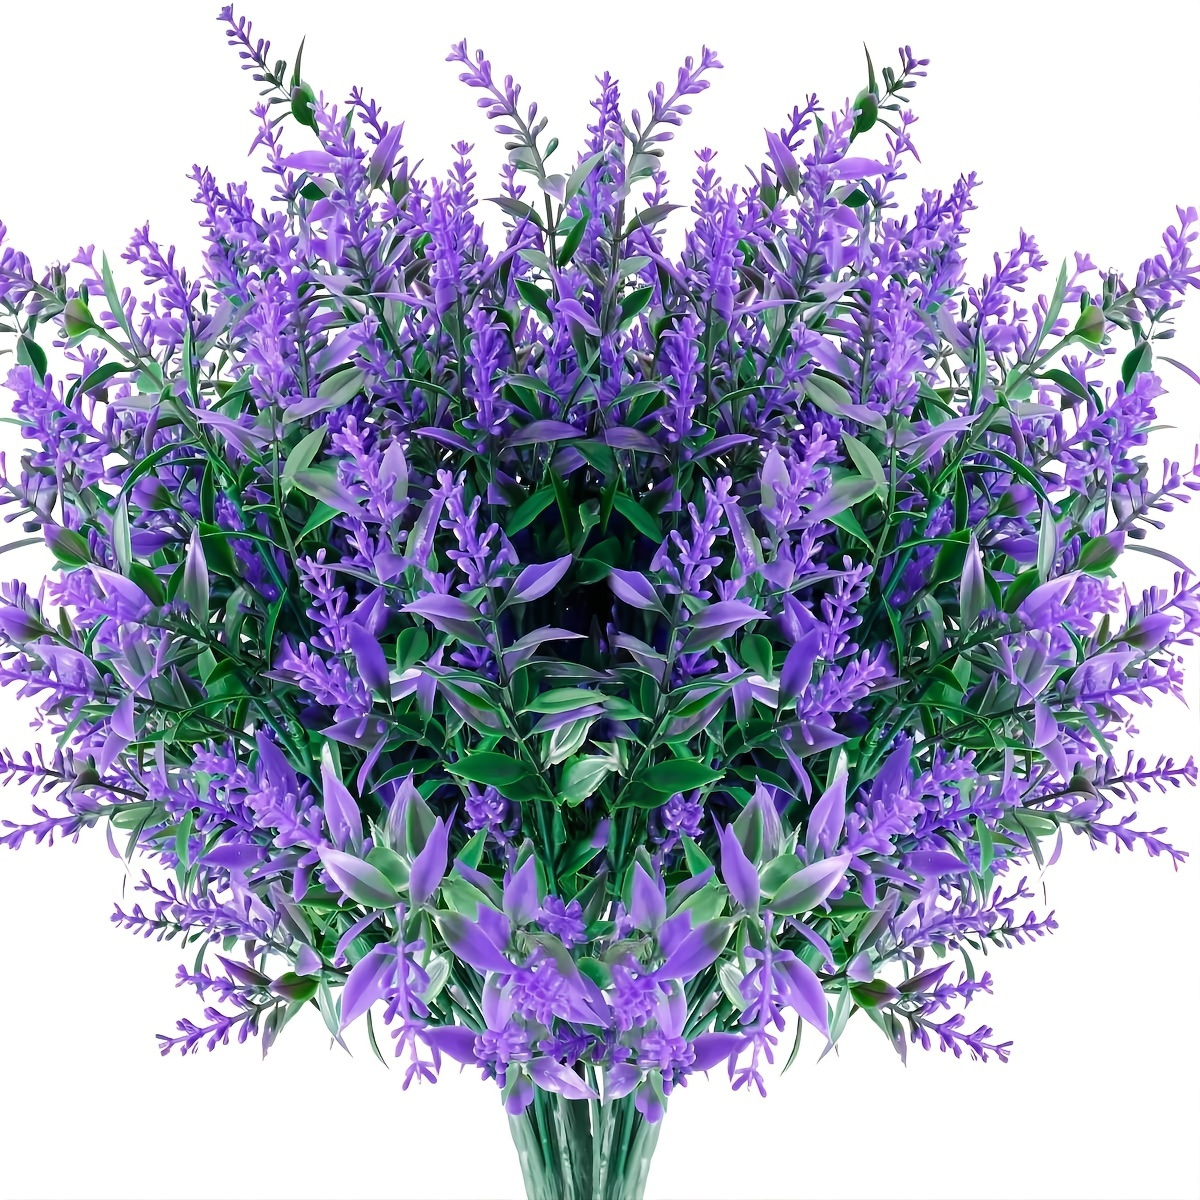 

4 Bunches Artificial Lavenders, Plastic Simulation Flowers Plants Indoor Outdoor Decoration, For Garden Porch Home Decor (purple 13.8in)